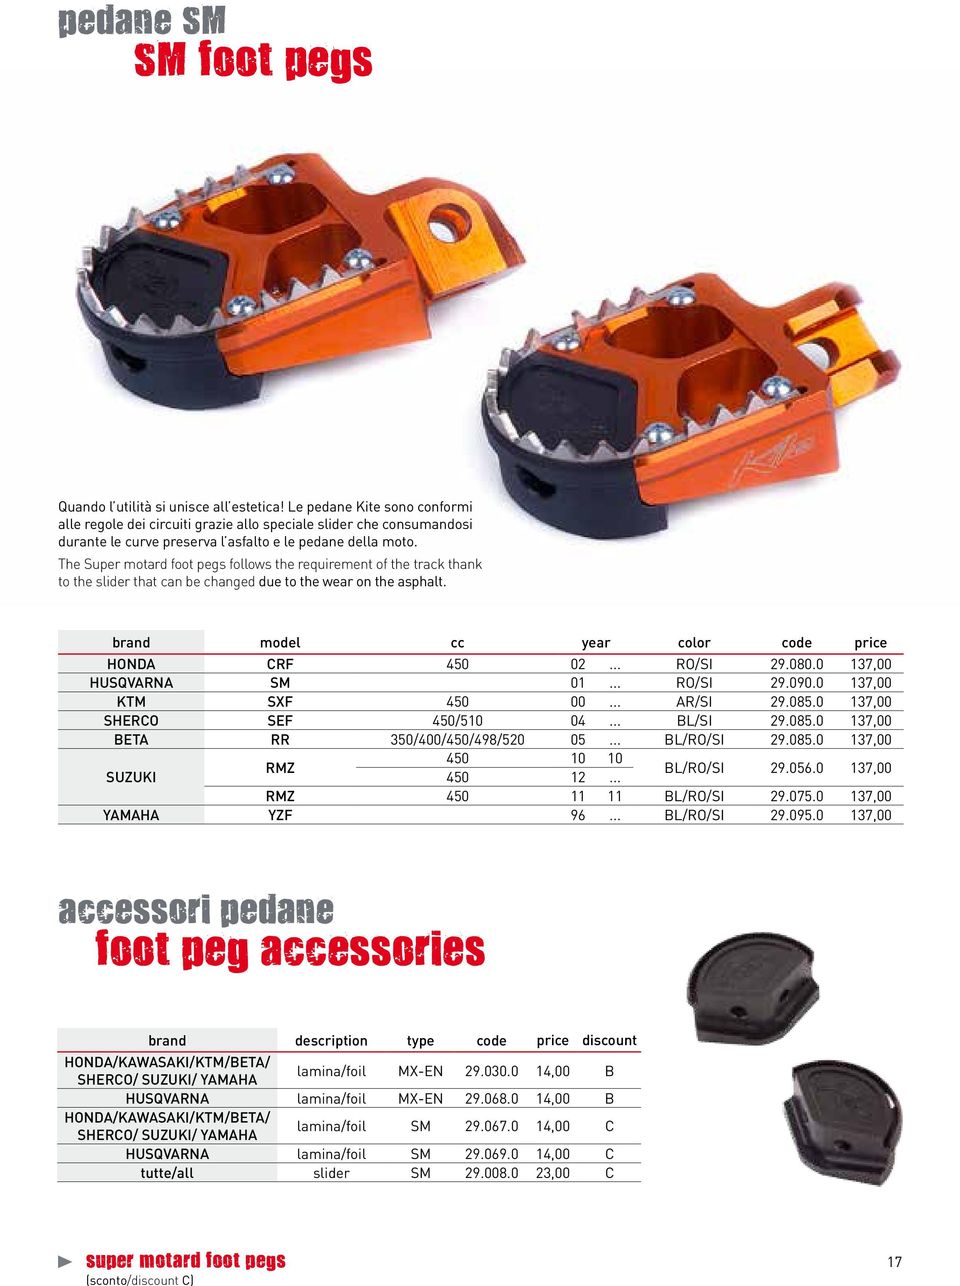 The Super motard foot pegs follows the requirement of the track thank to the slider that can be changed due to the wear on the asphalt. brand model cc year color code price HONDA CRF 450 02... RO/SI 29.